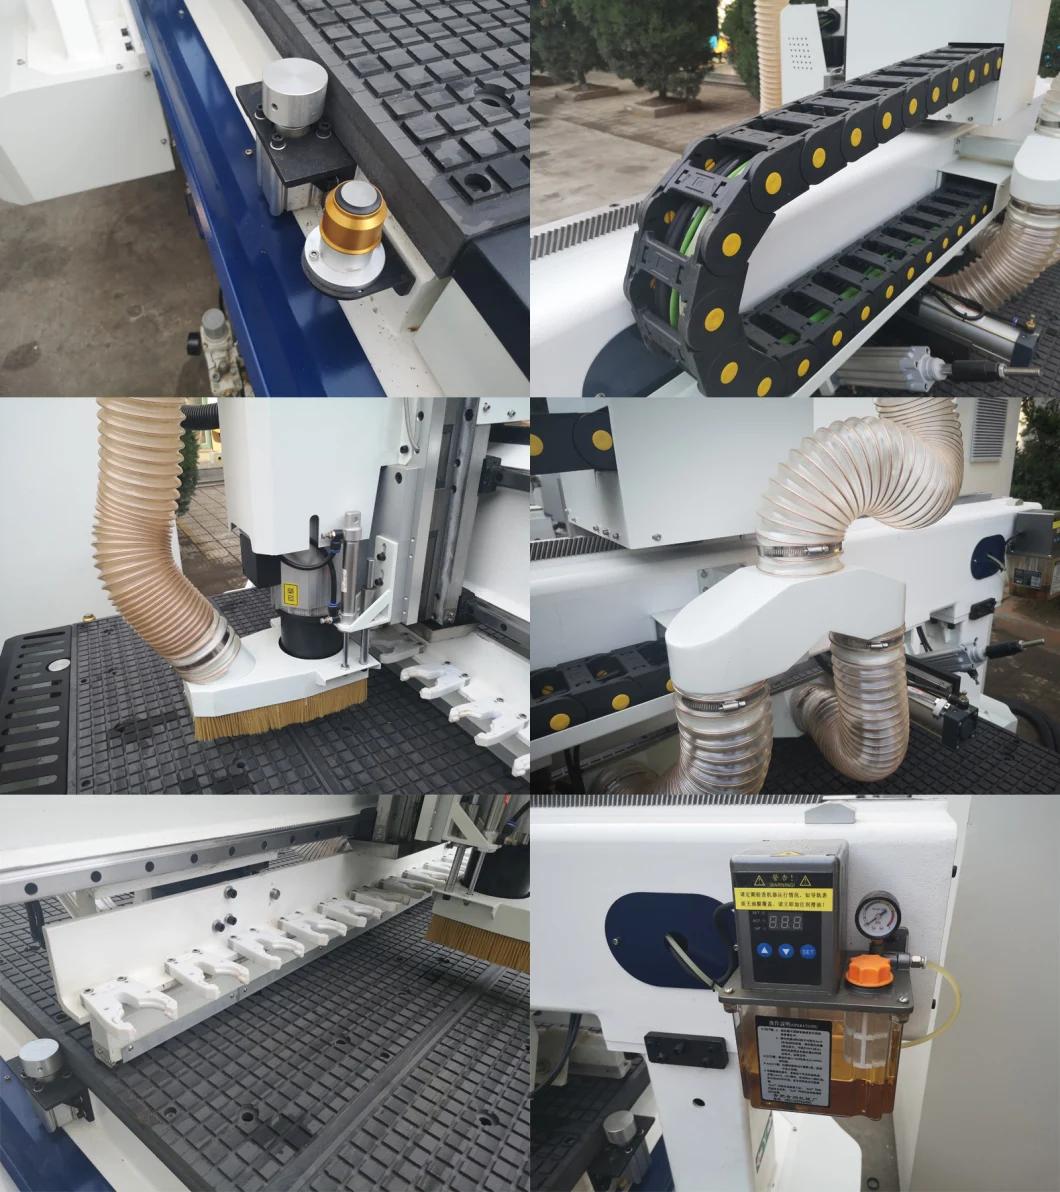 Mars S100-D 2 Working Tables CNC Router Machine with Automatic Tool Change